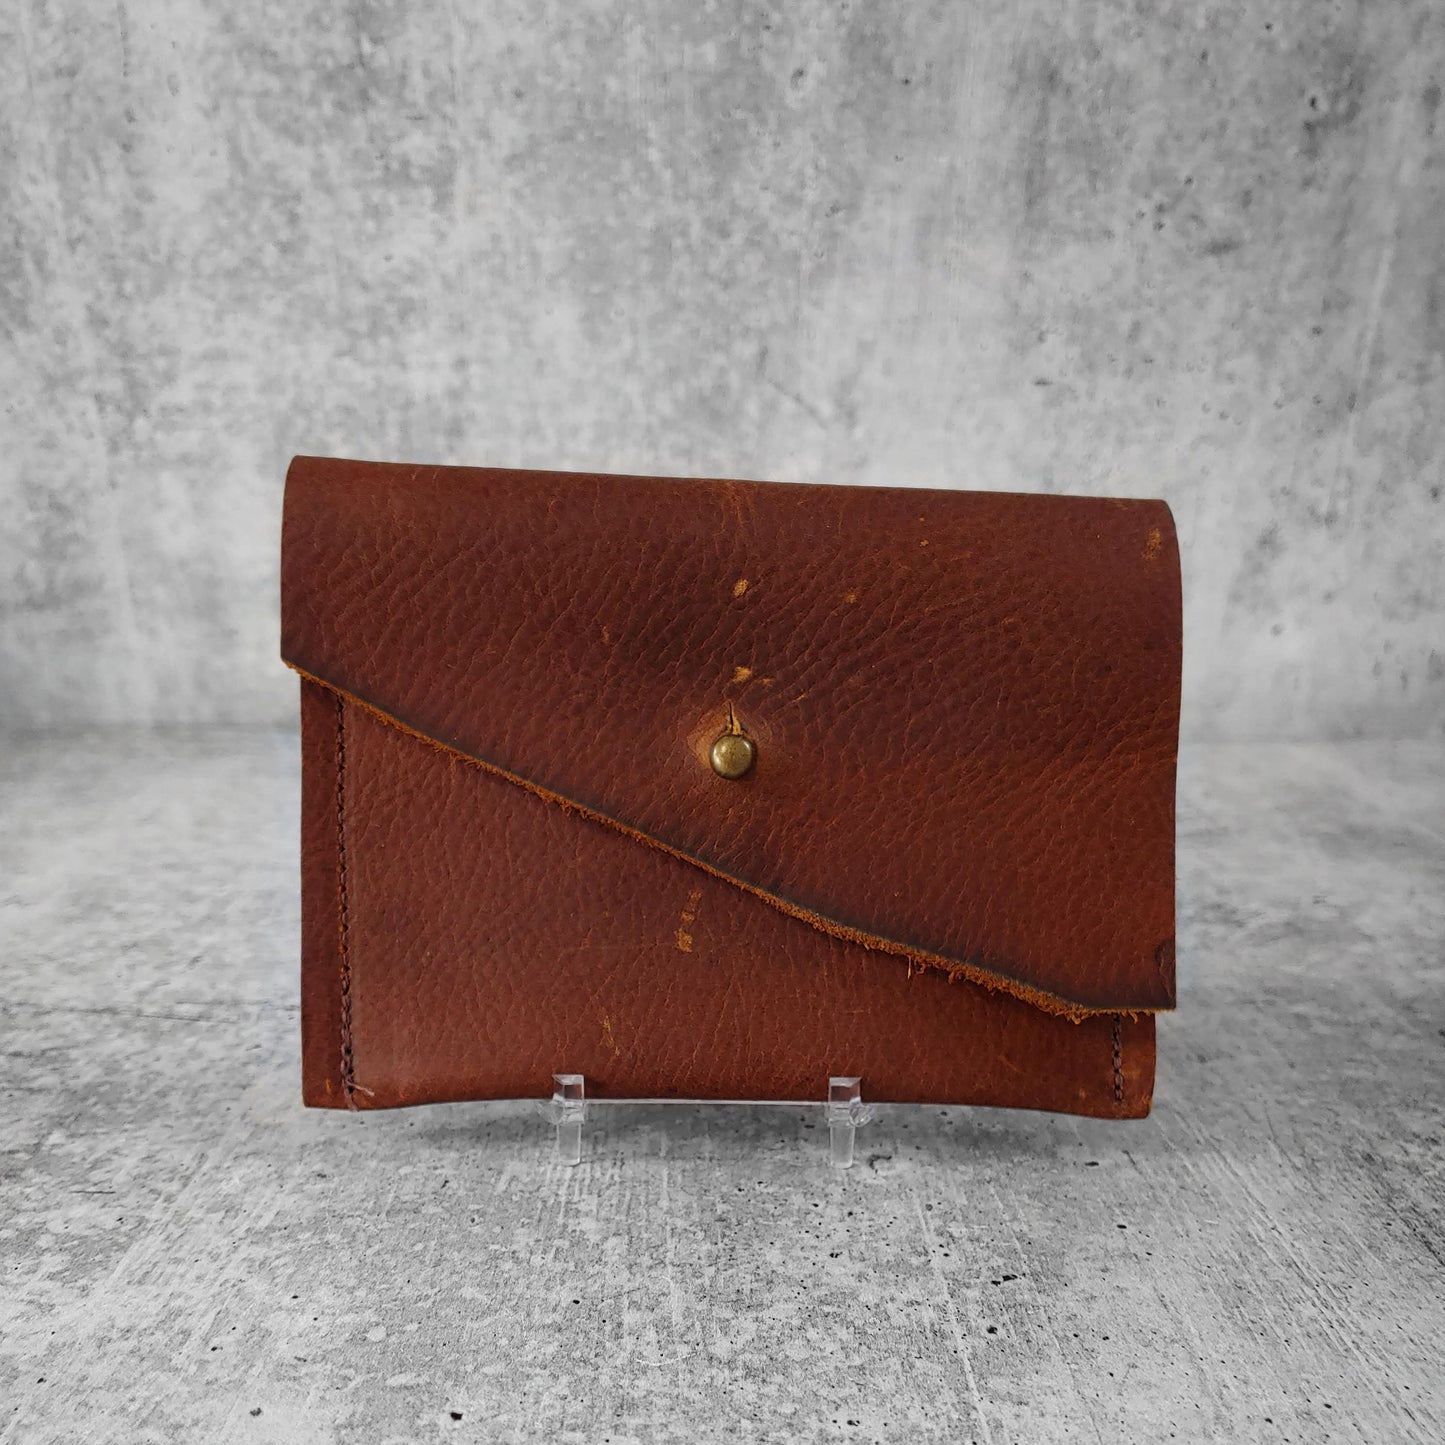 Front facing view of "wide leather wallet with asymmetric flap" in kodiak brown against a concrete background.